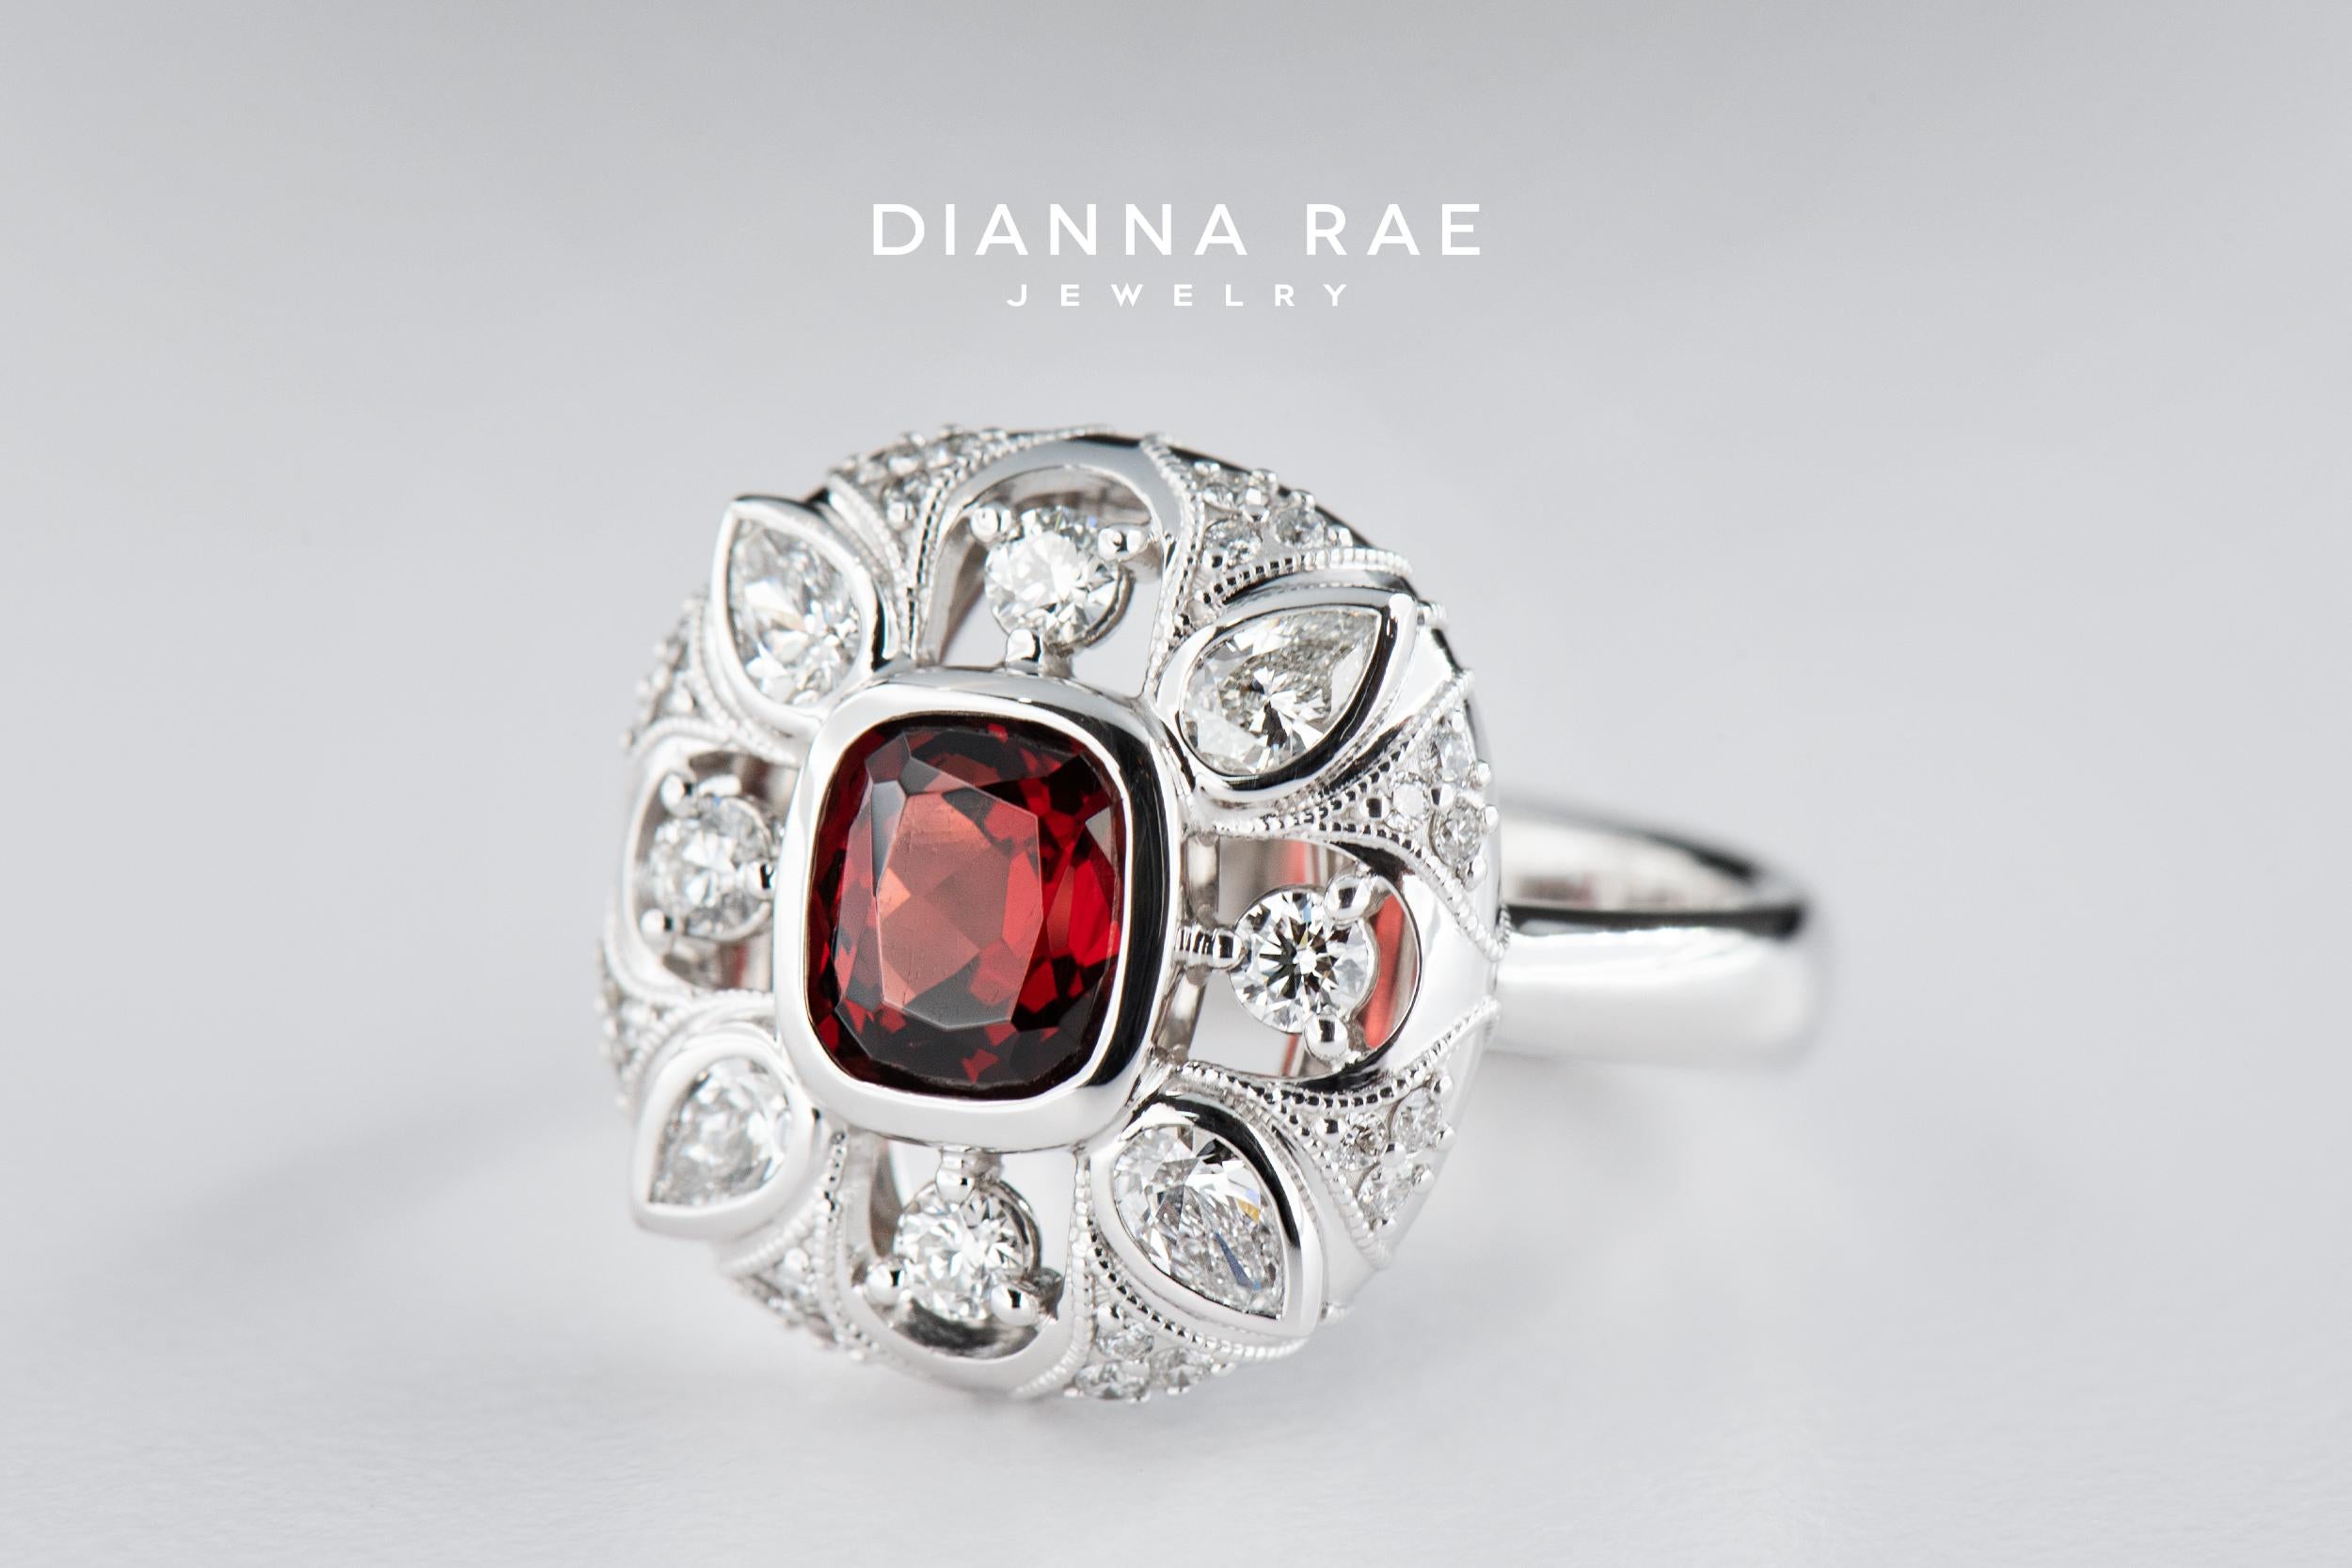 Crafted in 14k white gold, this 1.51 carat flame-red cushion Spinel most definitely catches the eye. Red Spinel is often mistaken for Ruby, so much so that the many Rubies of royalty have later been discovered to be Spinel. Simply viewing this ring